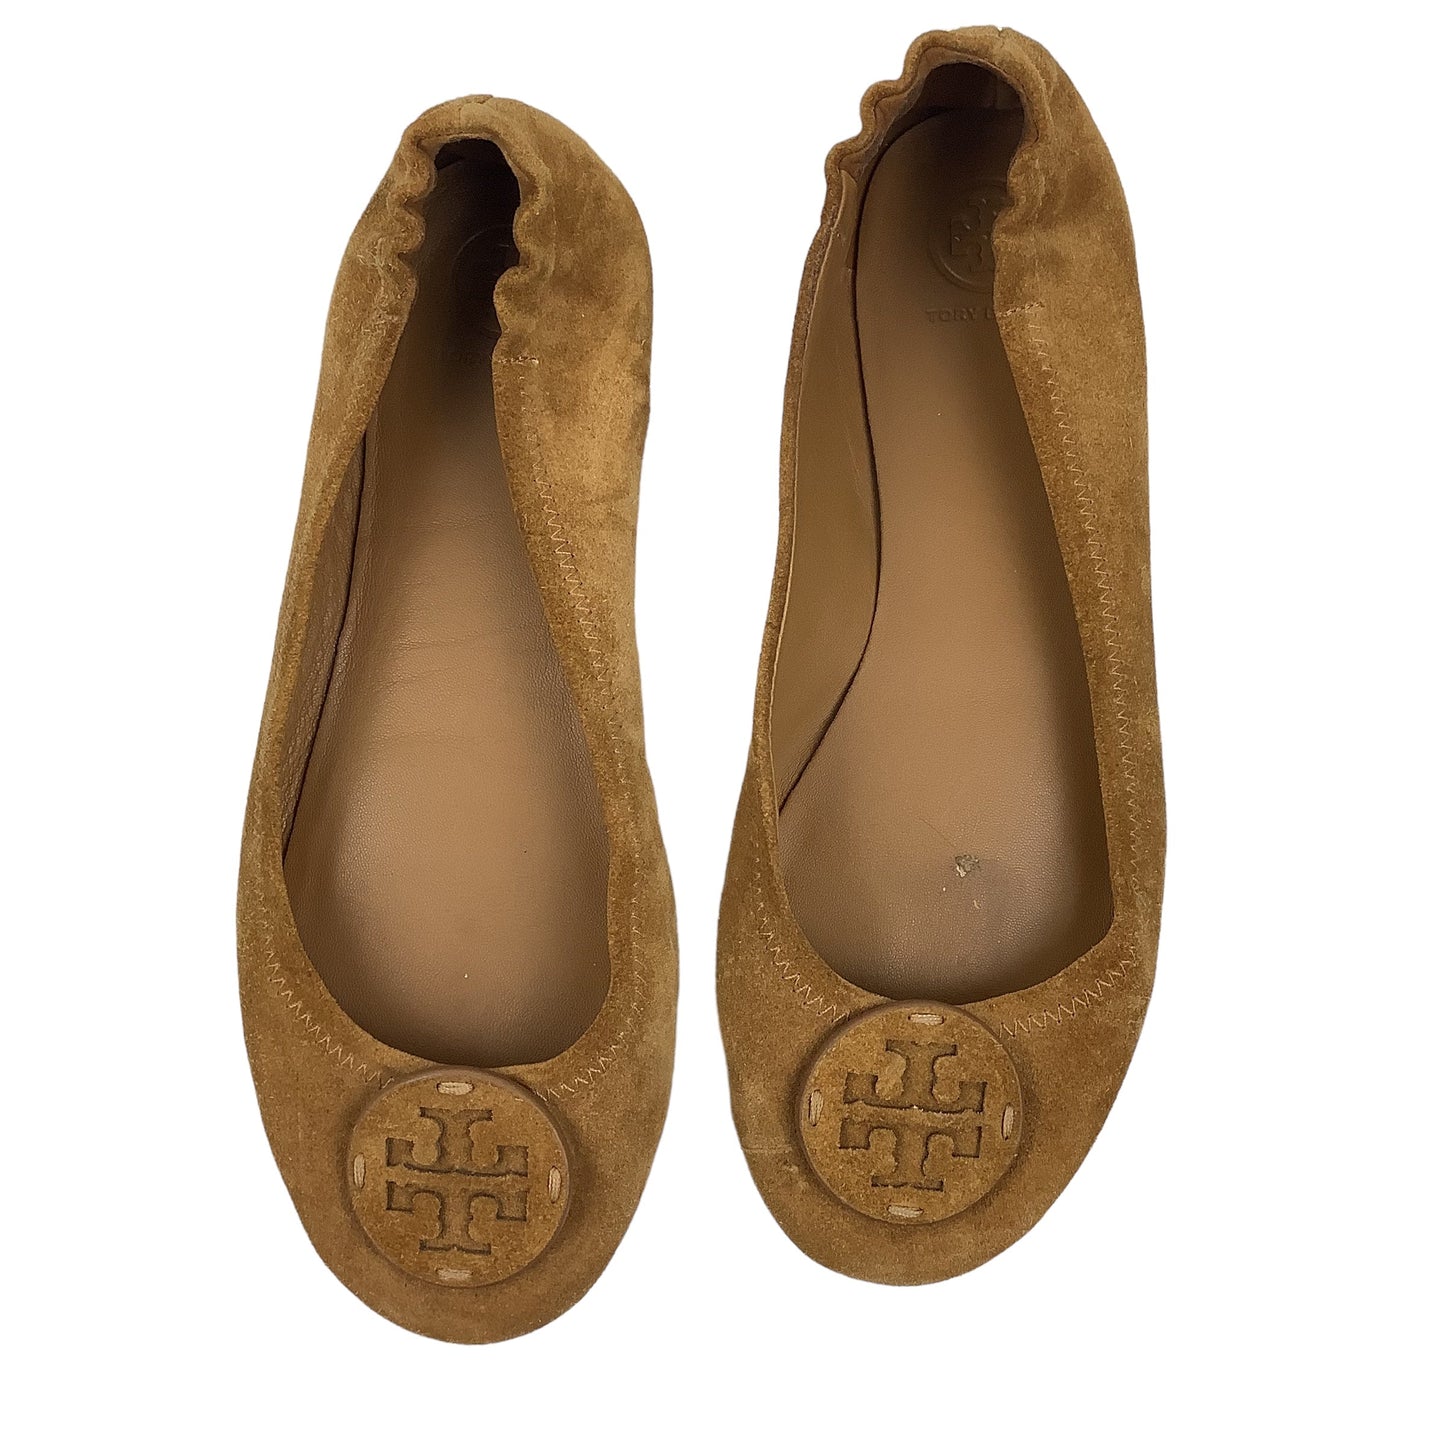 Brown Shoes Designer Tory Burch, Size 9